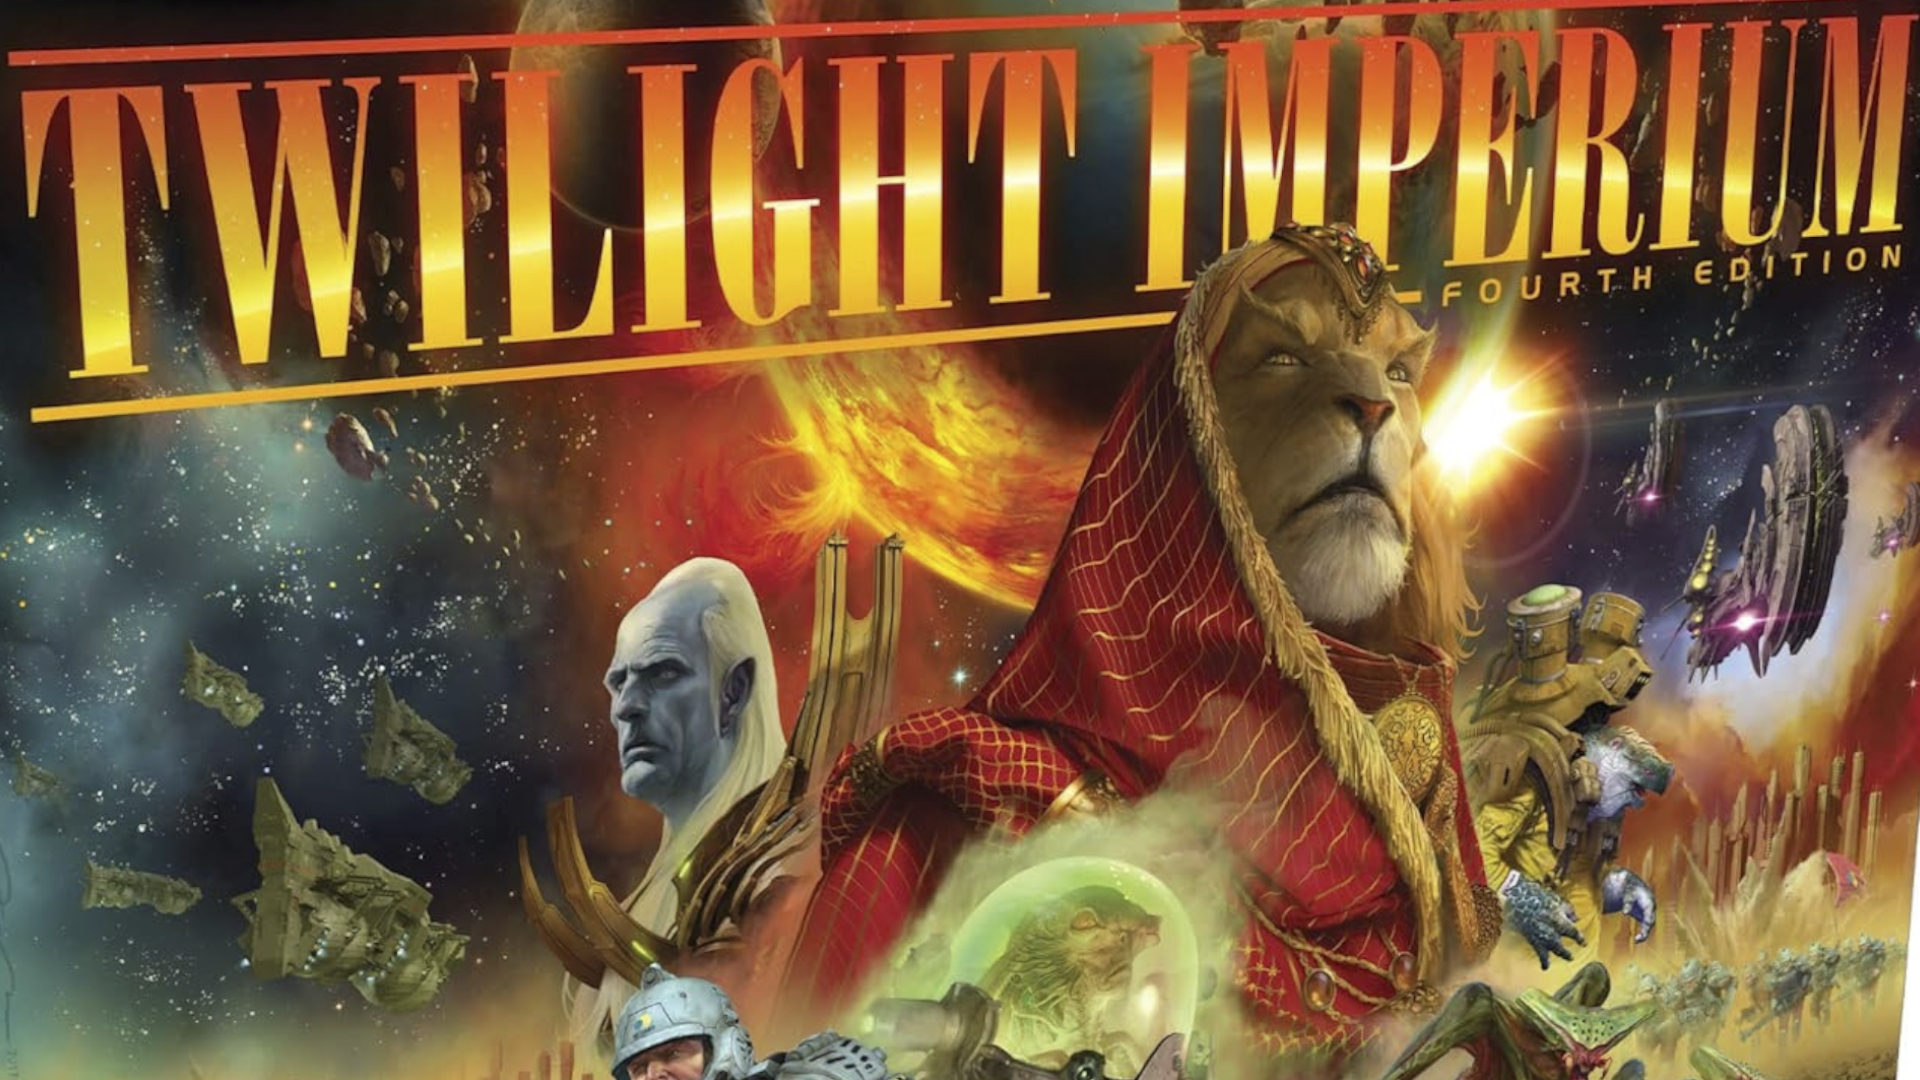 Twilight Imperium has an awesome 26% discount in this Amazon Prime Day  board games sale | GamesRadar+